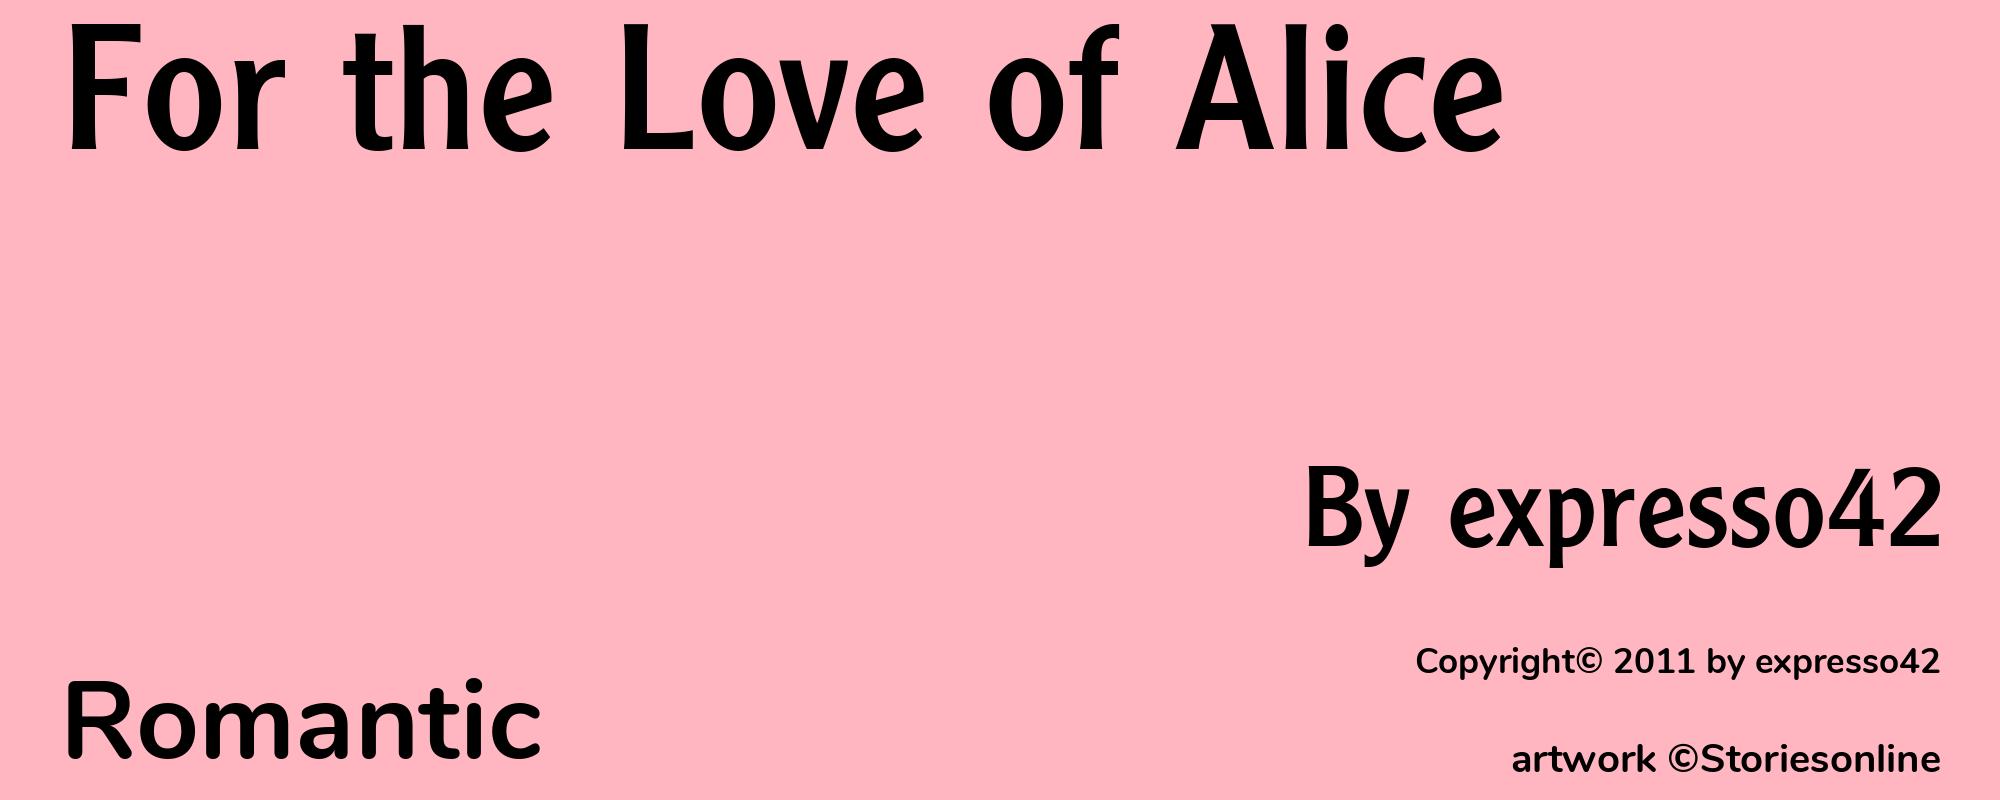 For the Love of Alice - Cover